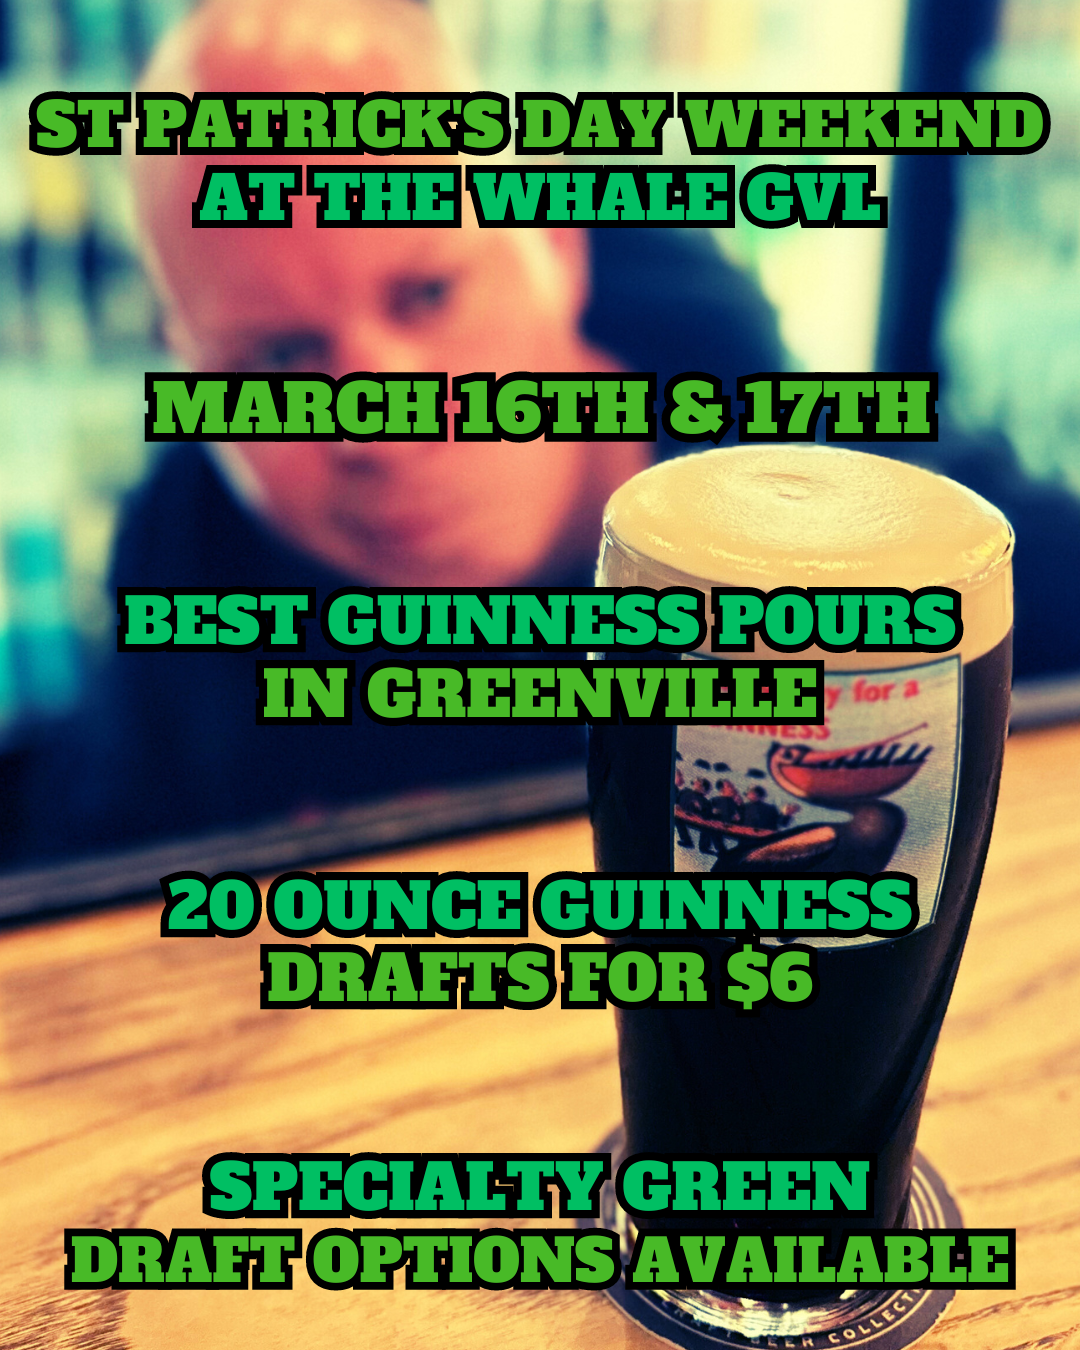 St Patrick's Day Weekend